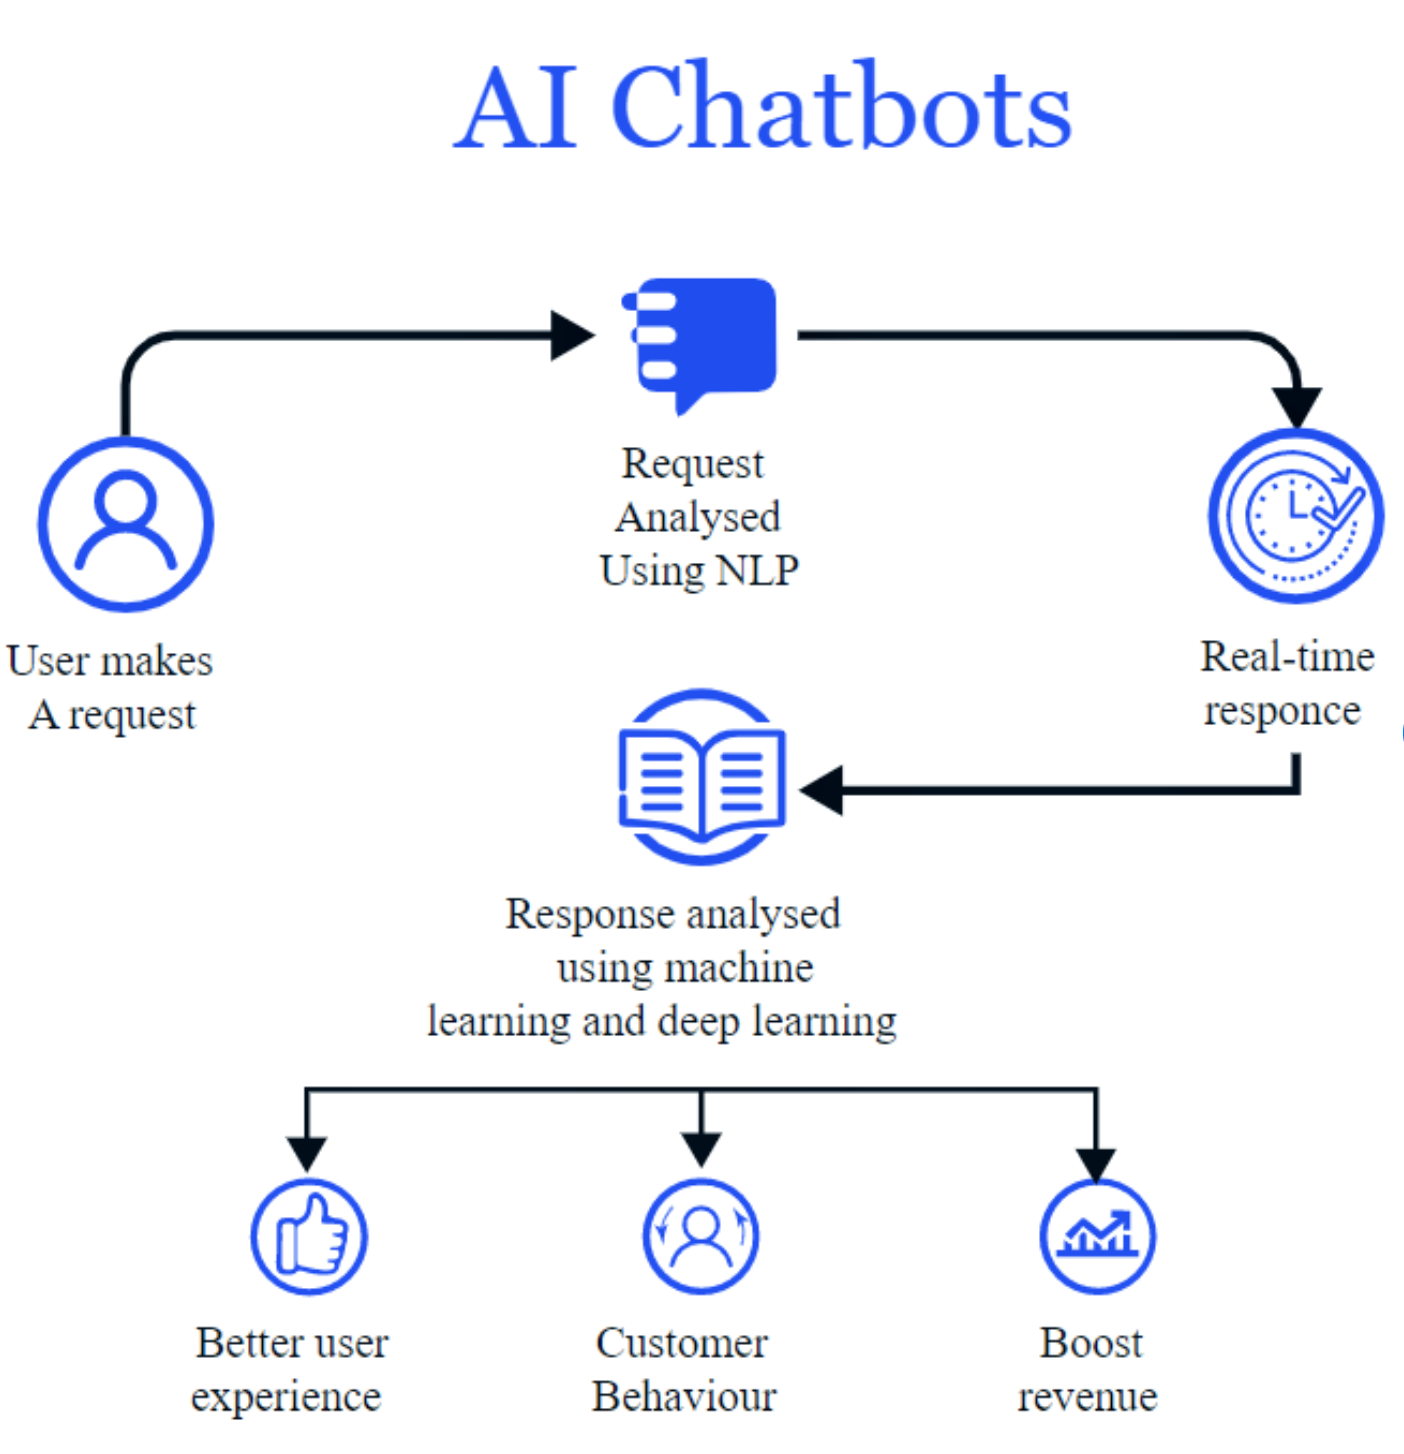 How AI Chatbots work